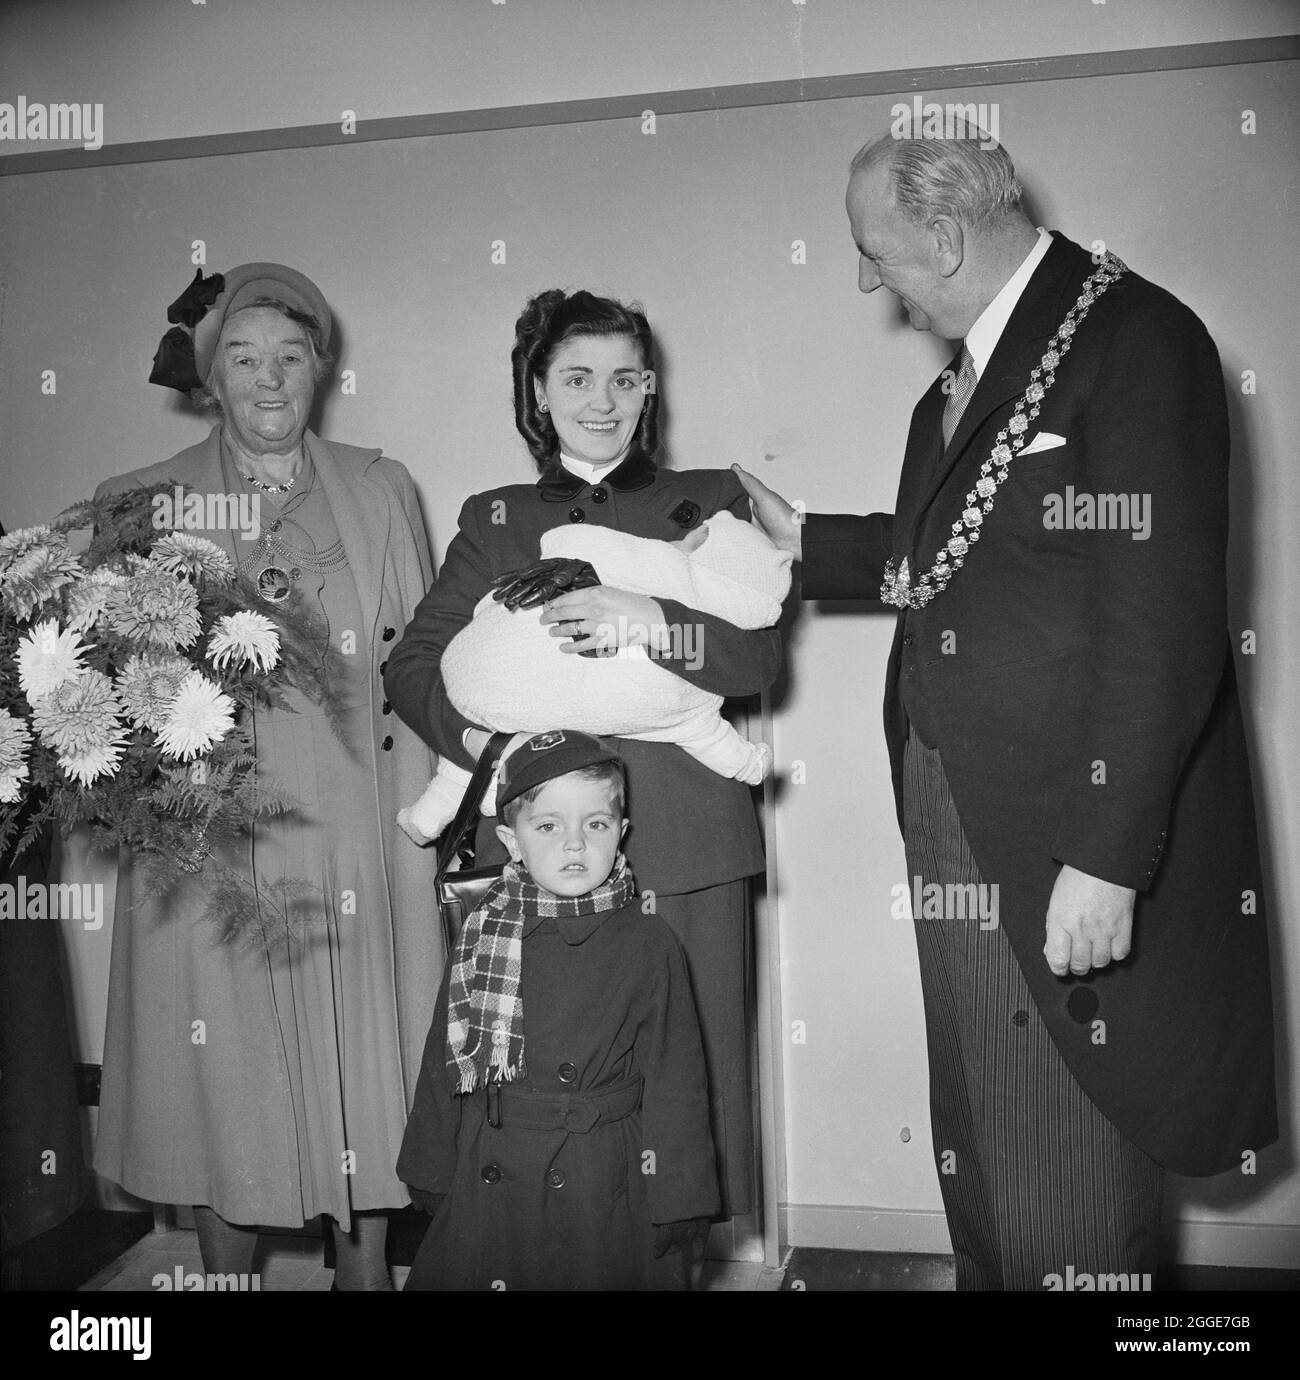 A woman and her two children, the tenants of the 3000th Easiform dwelling to be completed in Bristol, posed next to the Lord Mayor of Bristol and the Lady Mayoress. This image shows the opening of the 3000th Easiform dwelling in Bristol. The key was presented to the tenant by the Lord Mayor of Bristol. The Chairman of the Housing Committee announced that the new tenant was the 16,689th tenant to be housed or rehoused by the Council following the end of the Second World War in 1945. Sir Maurice Laing also attended the ceremony and reflected on the success of the house building programme in Bris Stock Photo